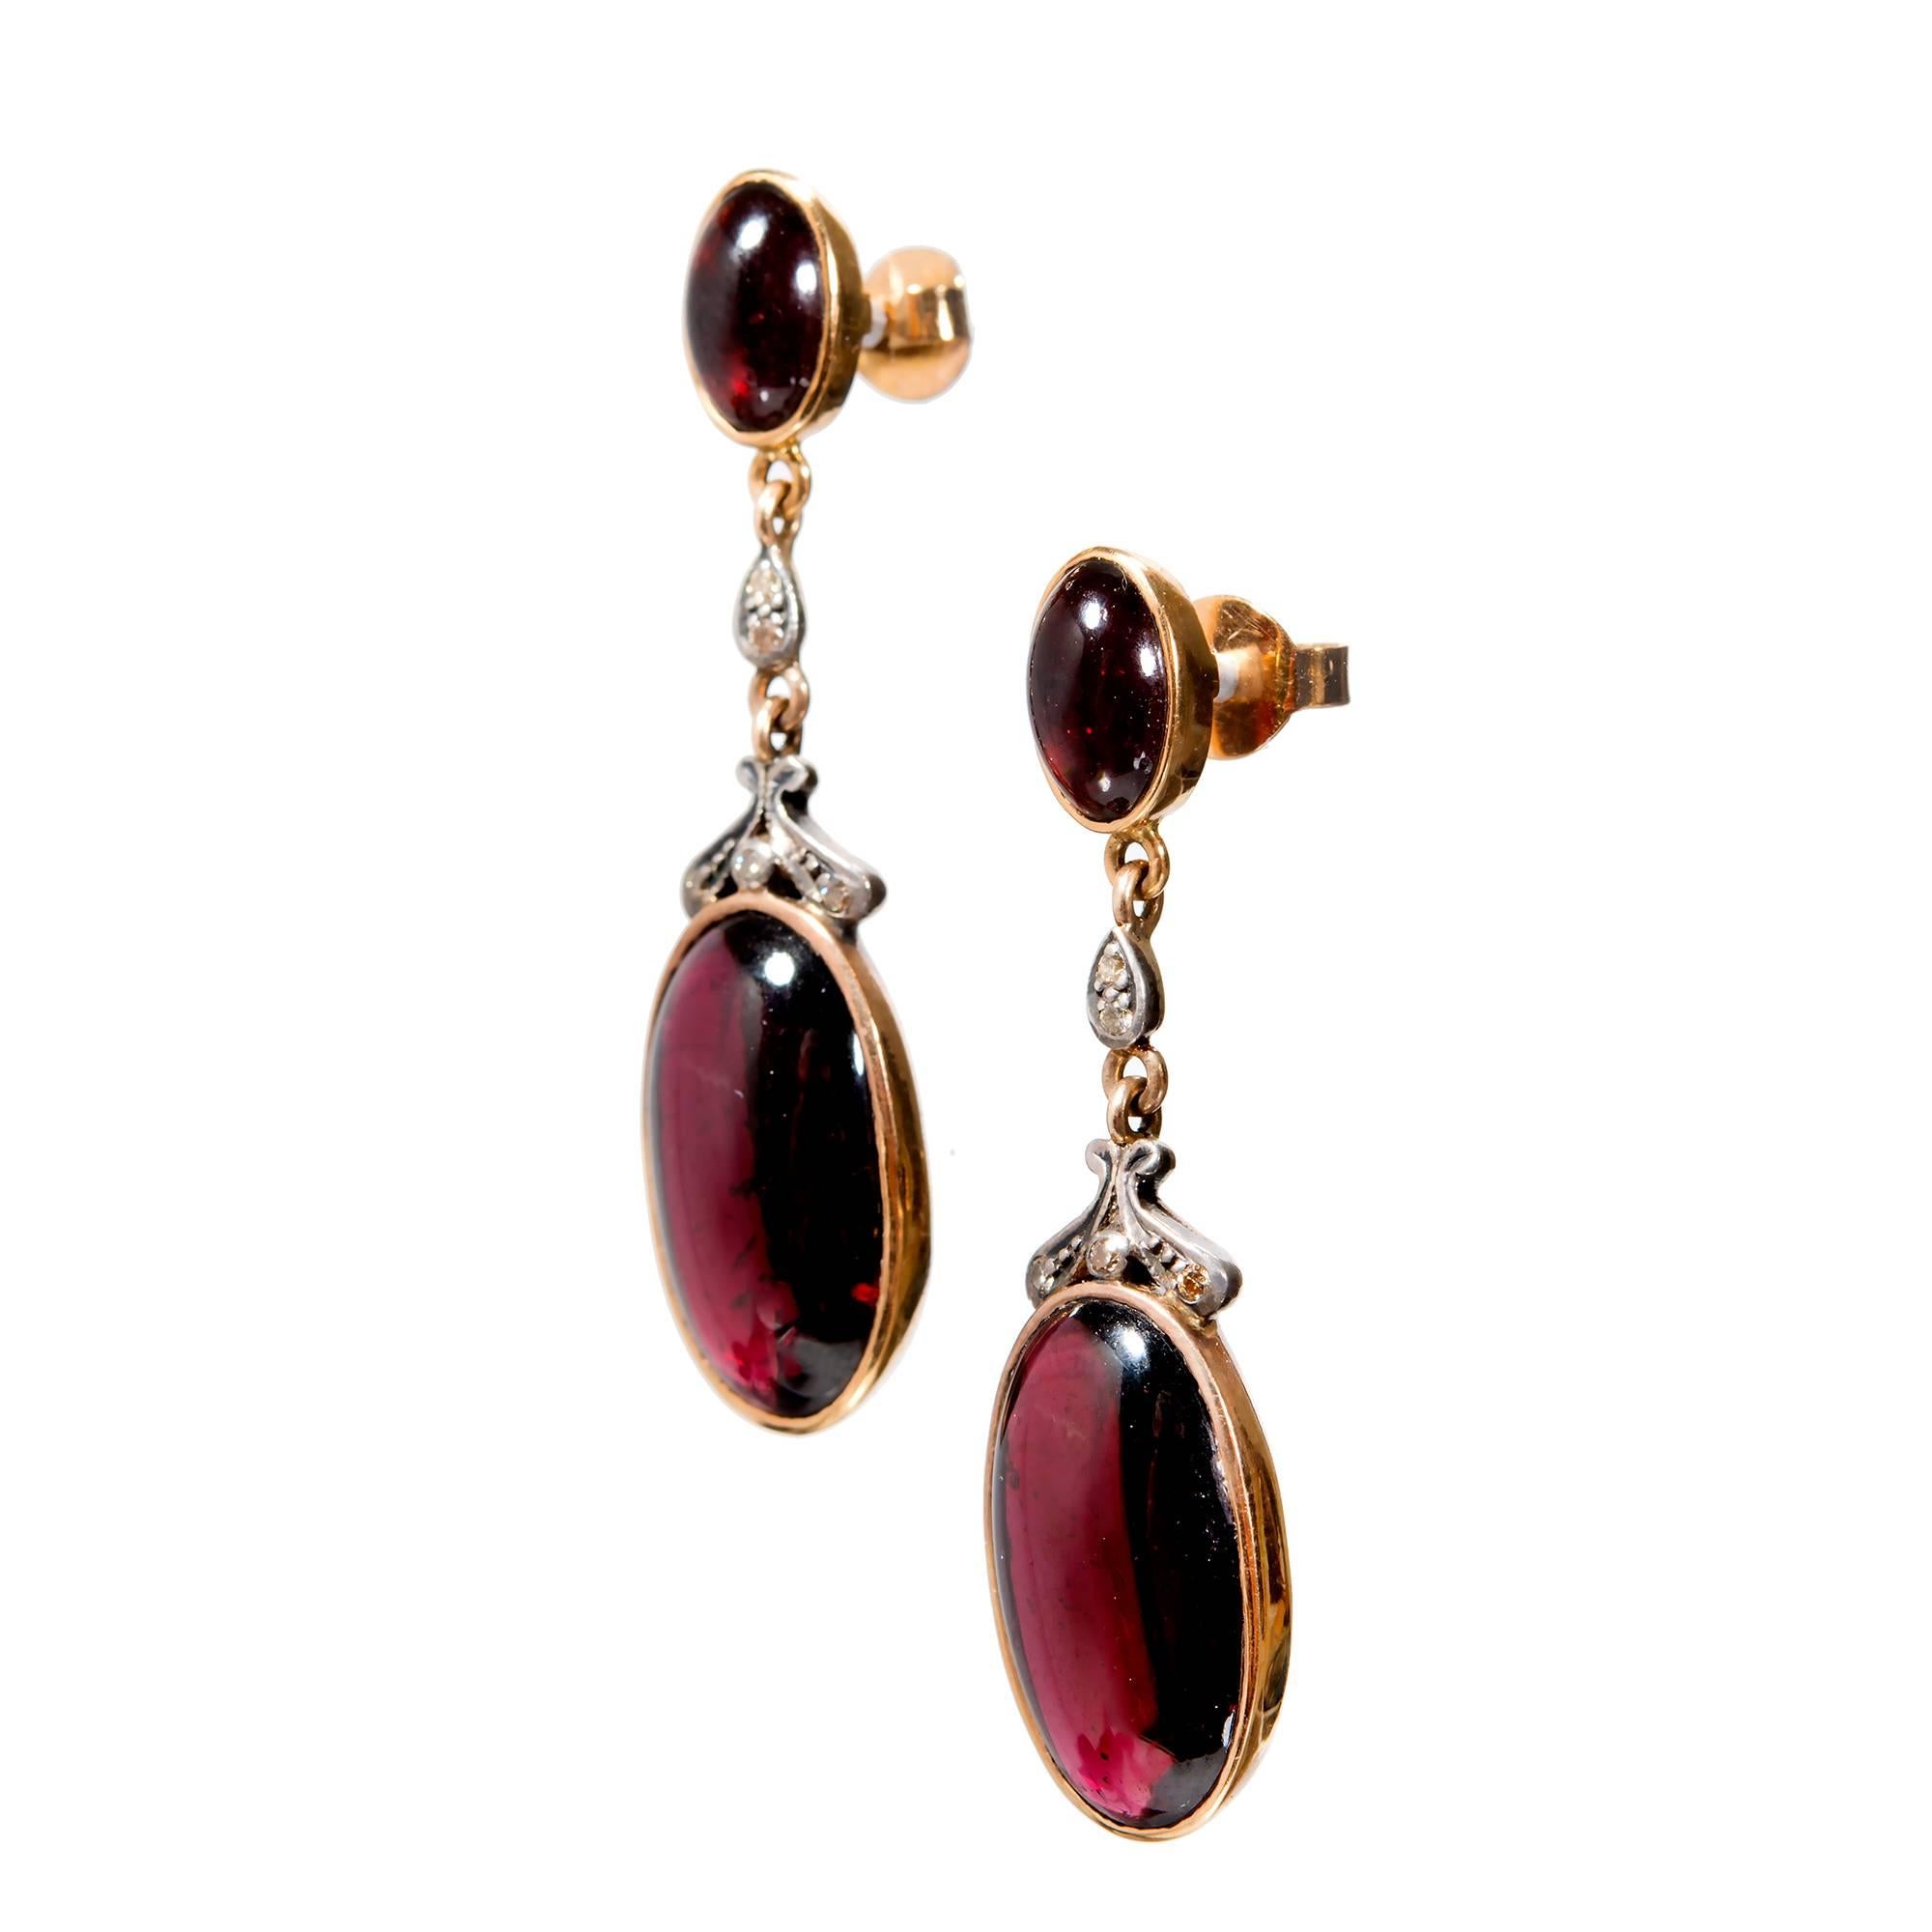 Circa 1930 Garnet and Diamond 18k rose gold and silver hand done bezels and bead set diamonds.

2 oval reddish Garnets, approx. total weight 2.00cts, SI1, 8.65 x 5.63 x 3.09mm
10 full cut diamonds, approx. total weight .10cts, J – K, SI
2 oval